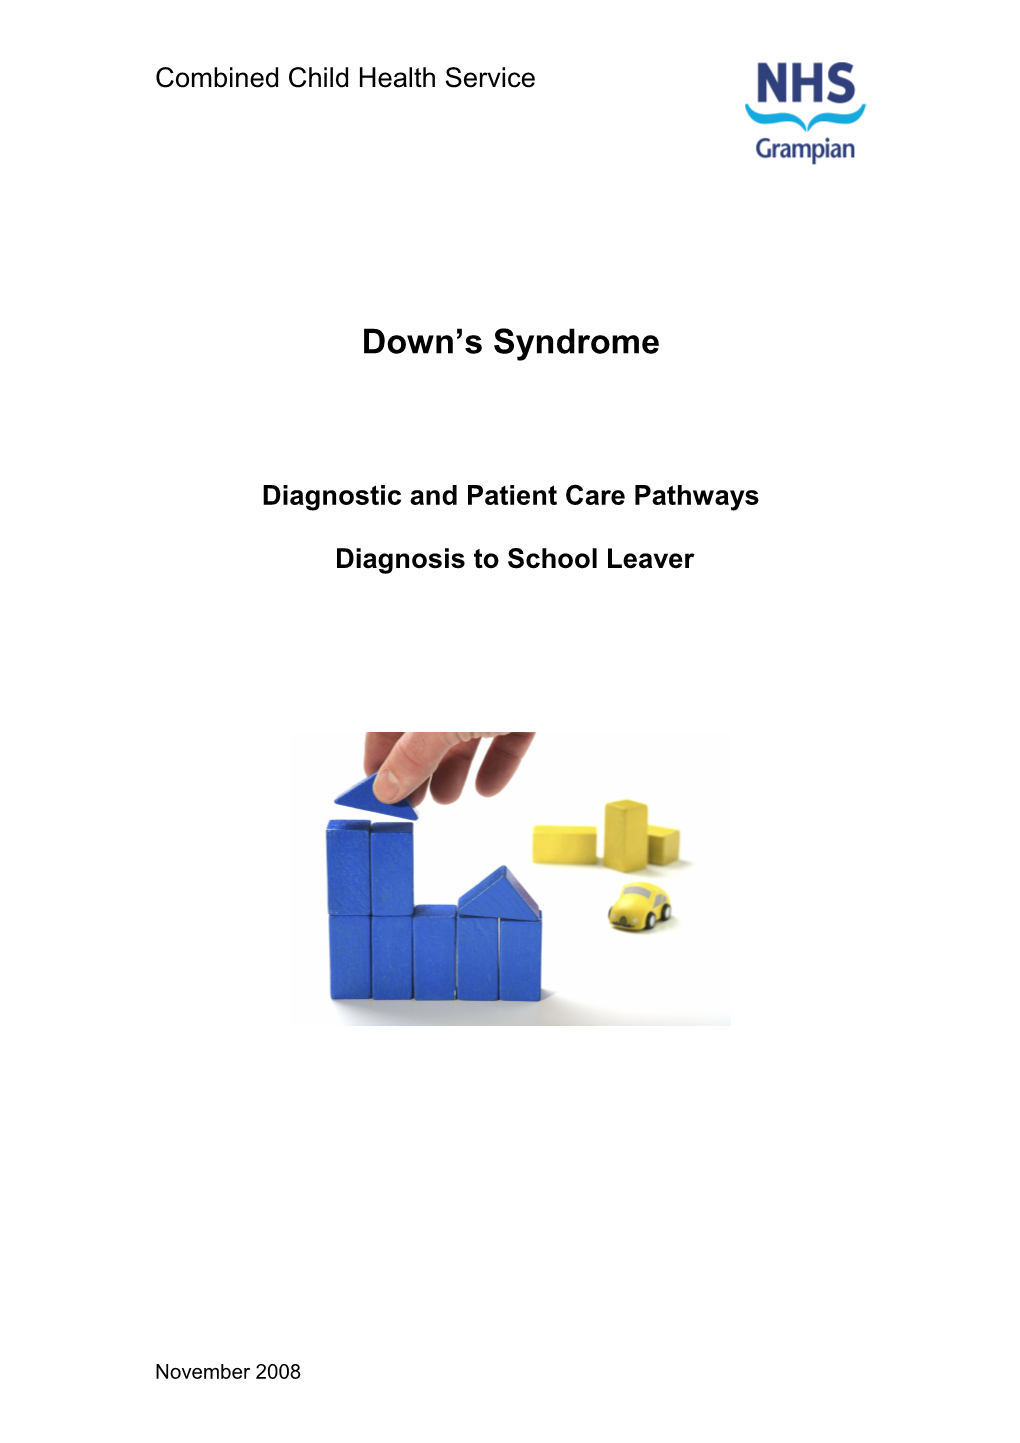 Downs Syndrome Diagnostic and Patient Care Pathways